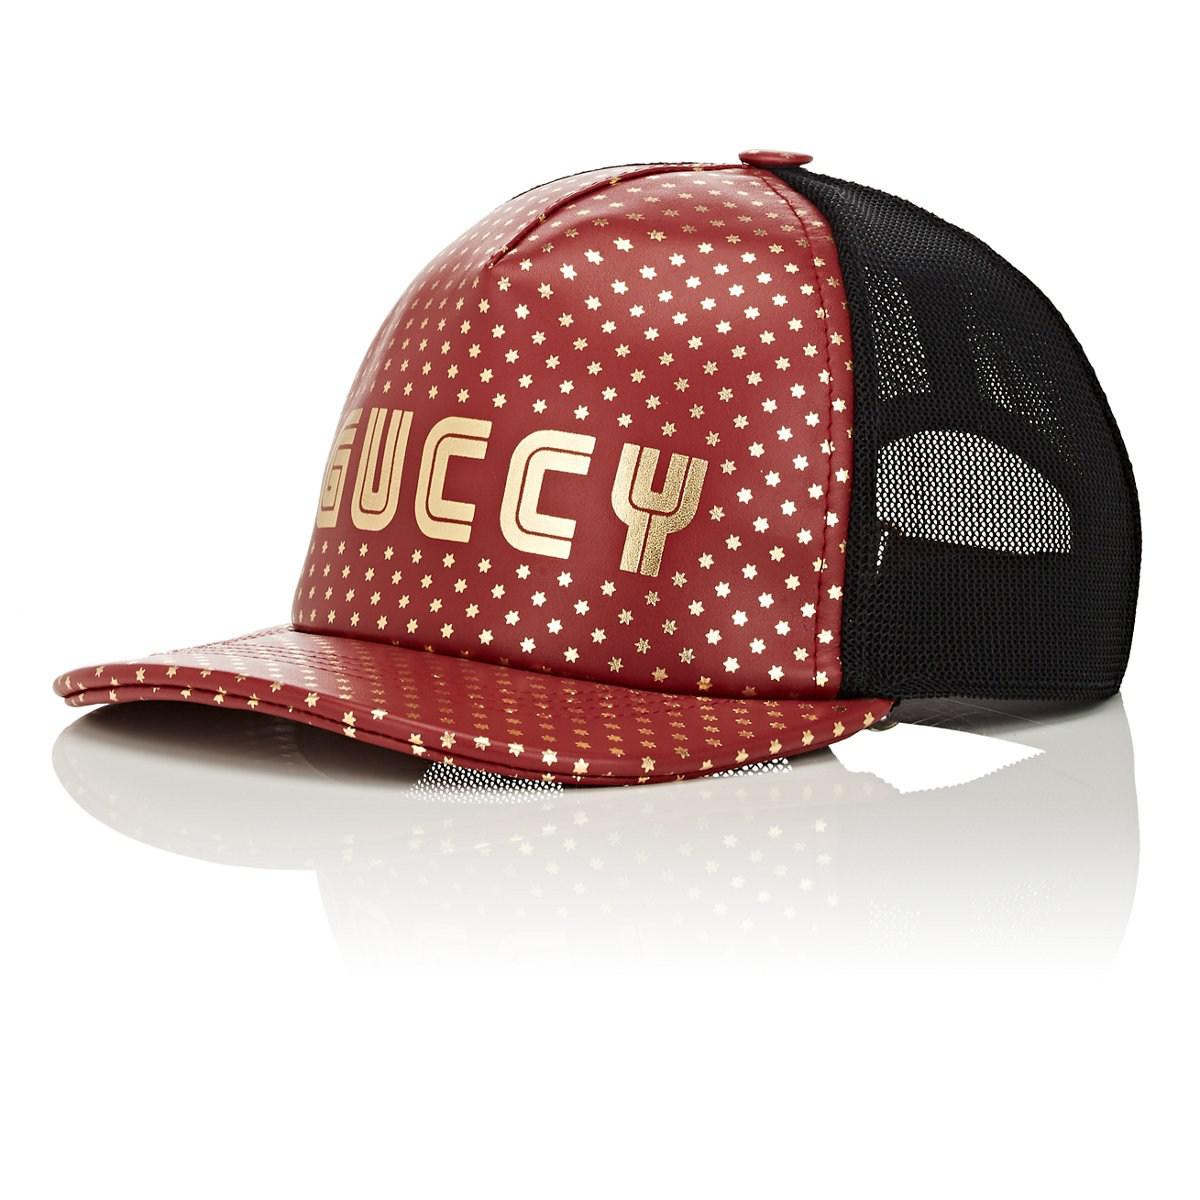 Gucci Guccy Leather Baseball Cap in Red for Men - Lyst